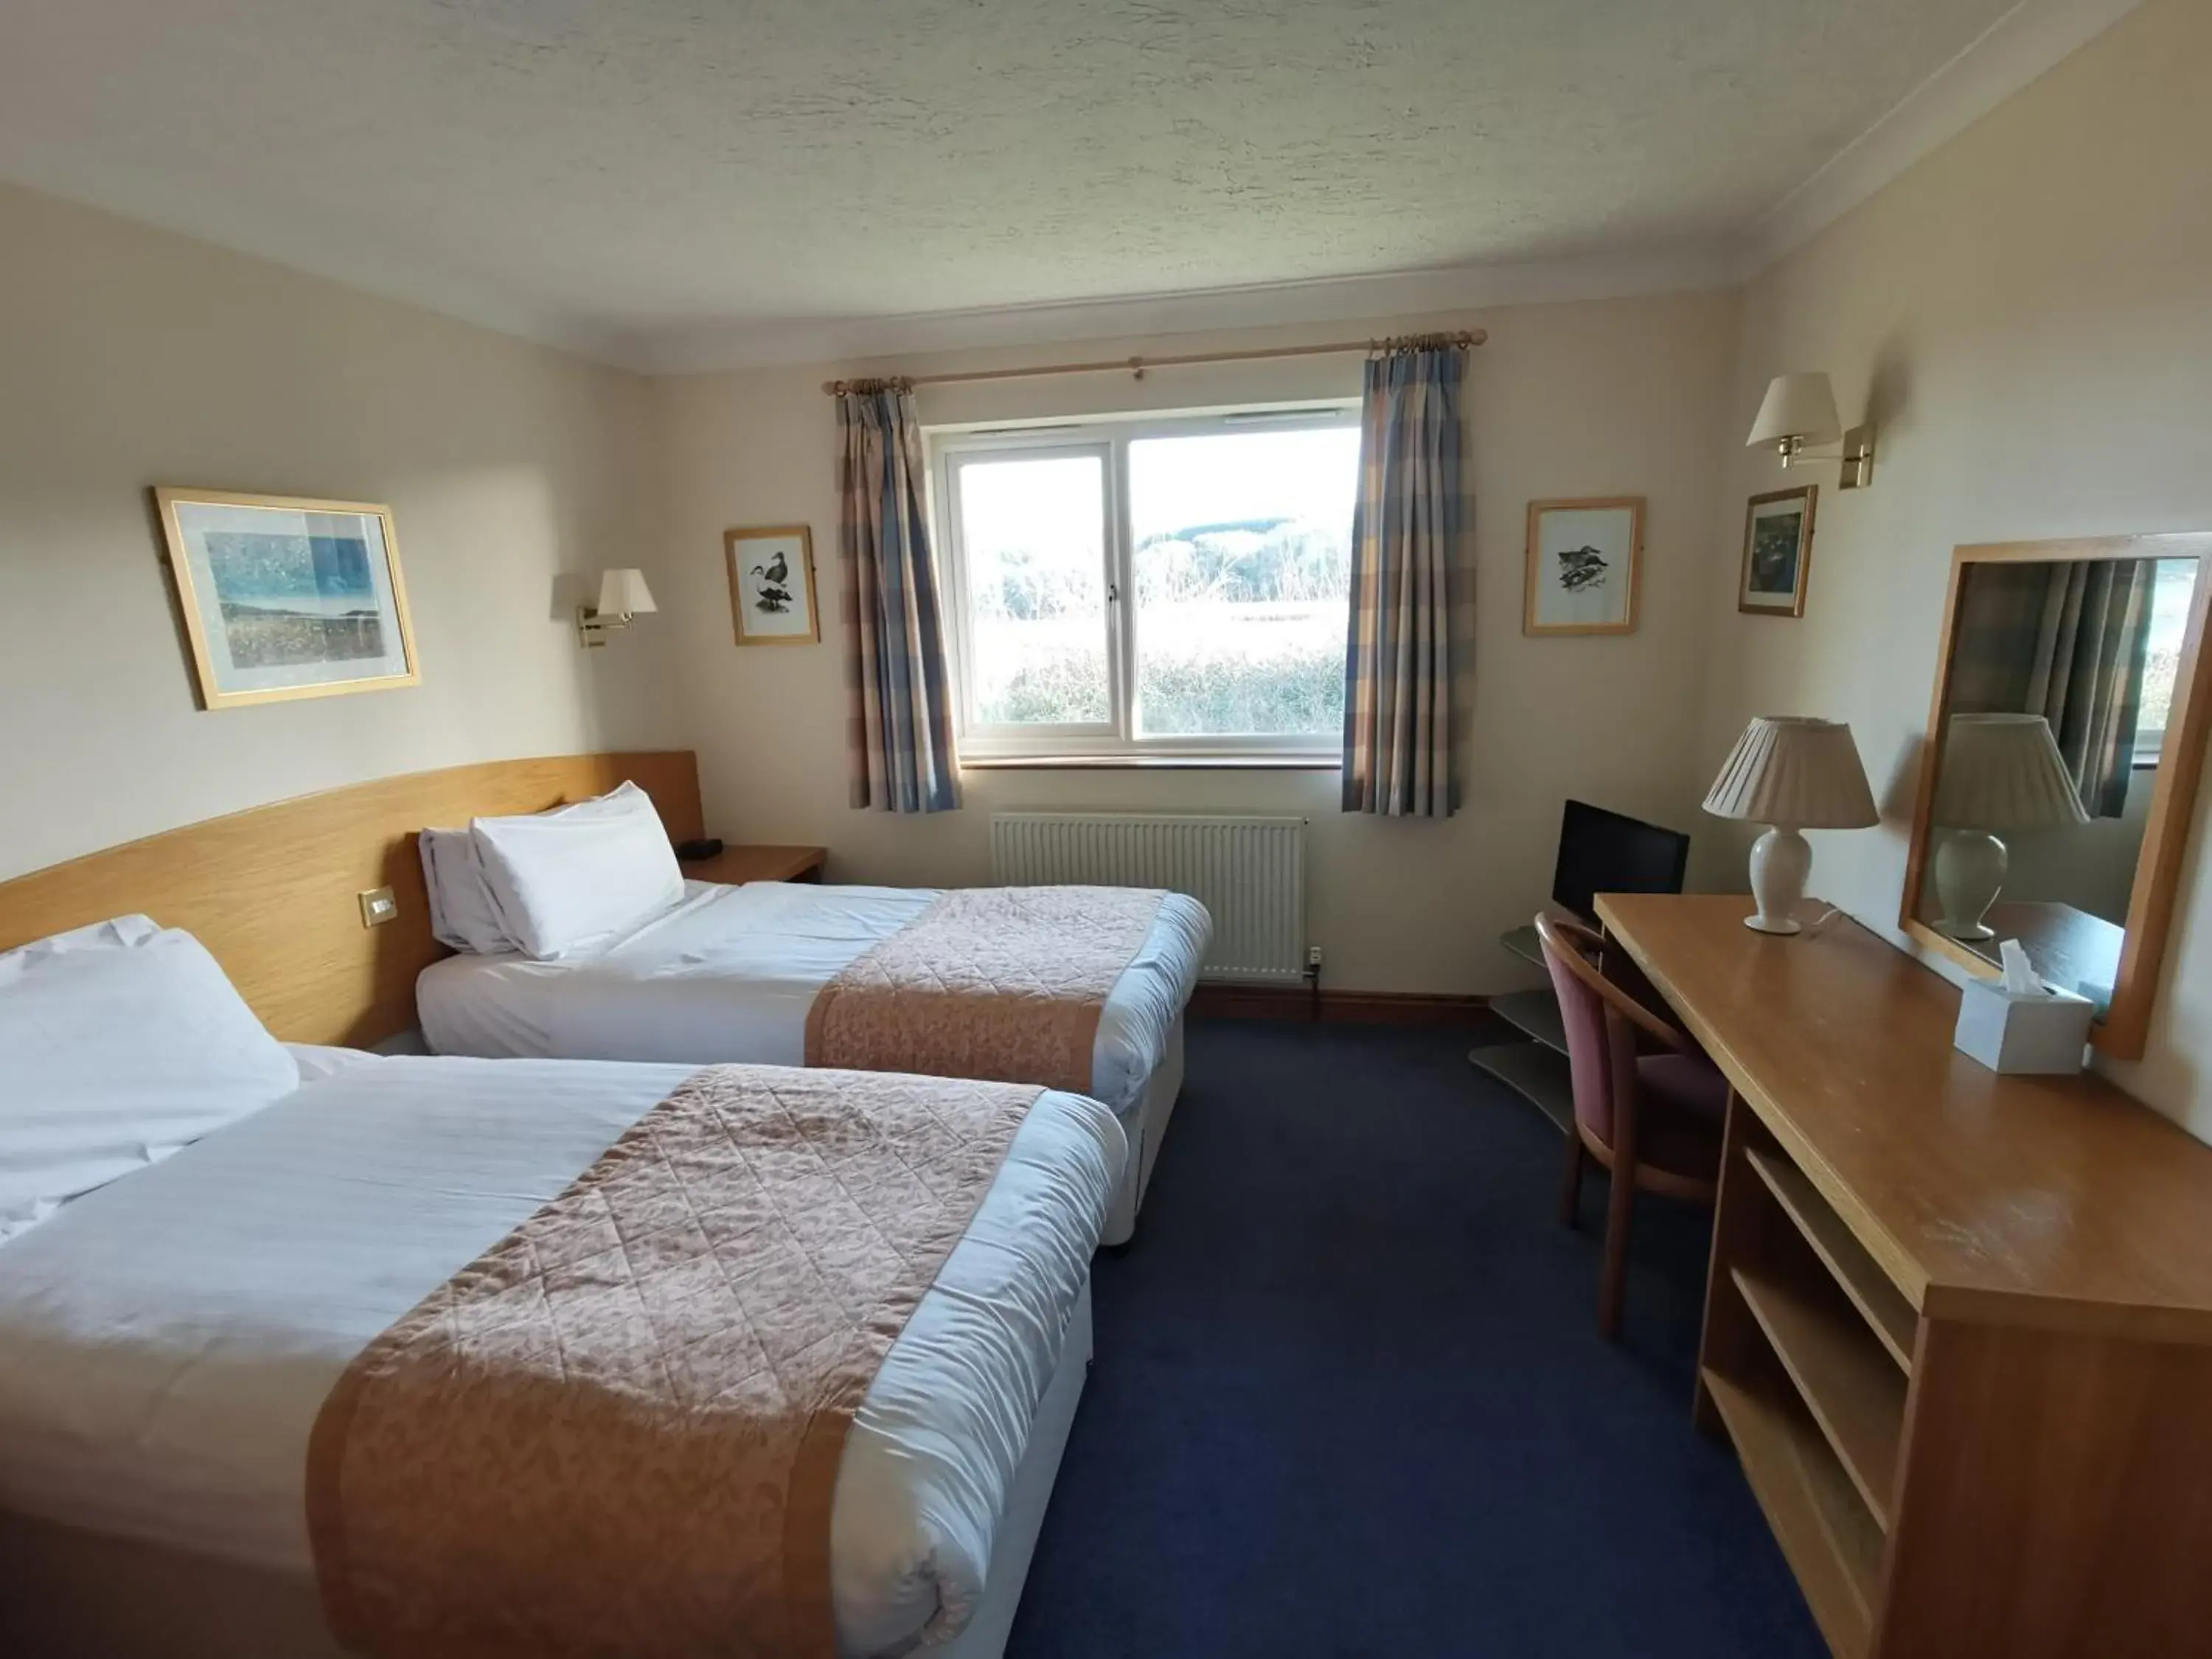 Self-Catering One Bedroom Estuary Lodge Apartment in Passage House Hotel